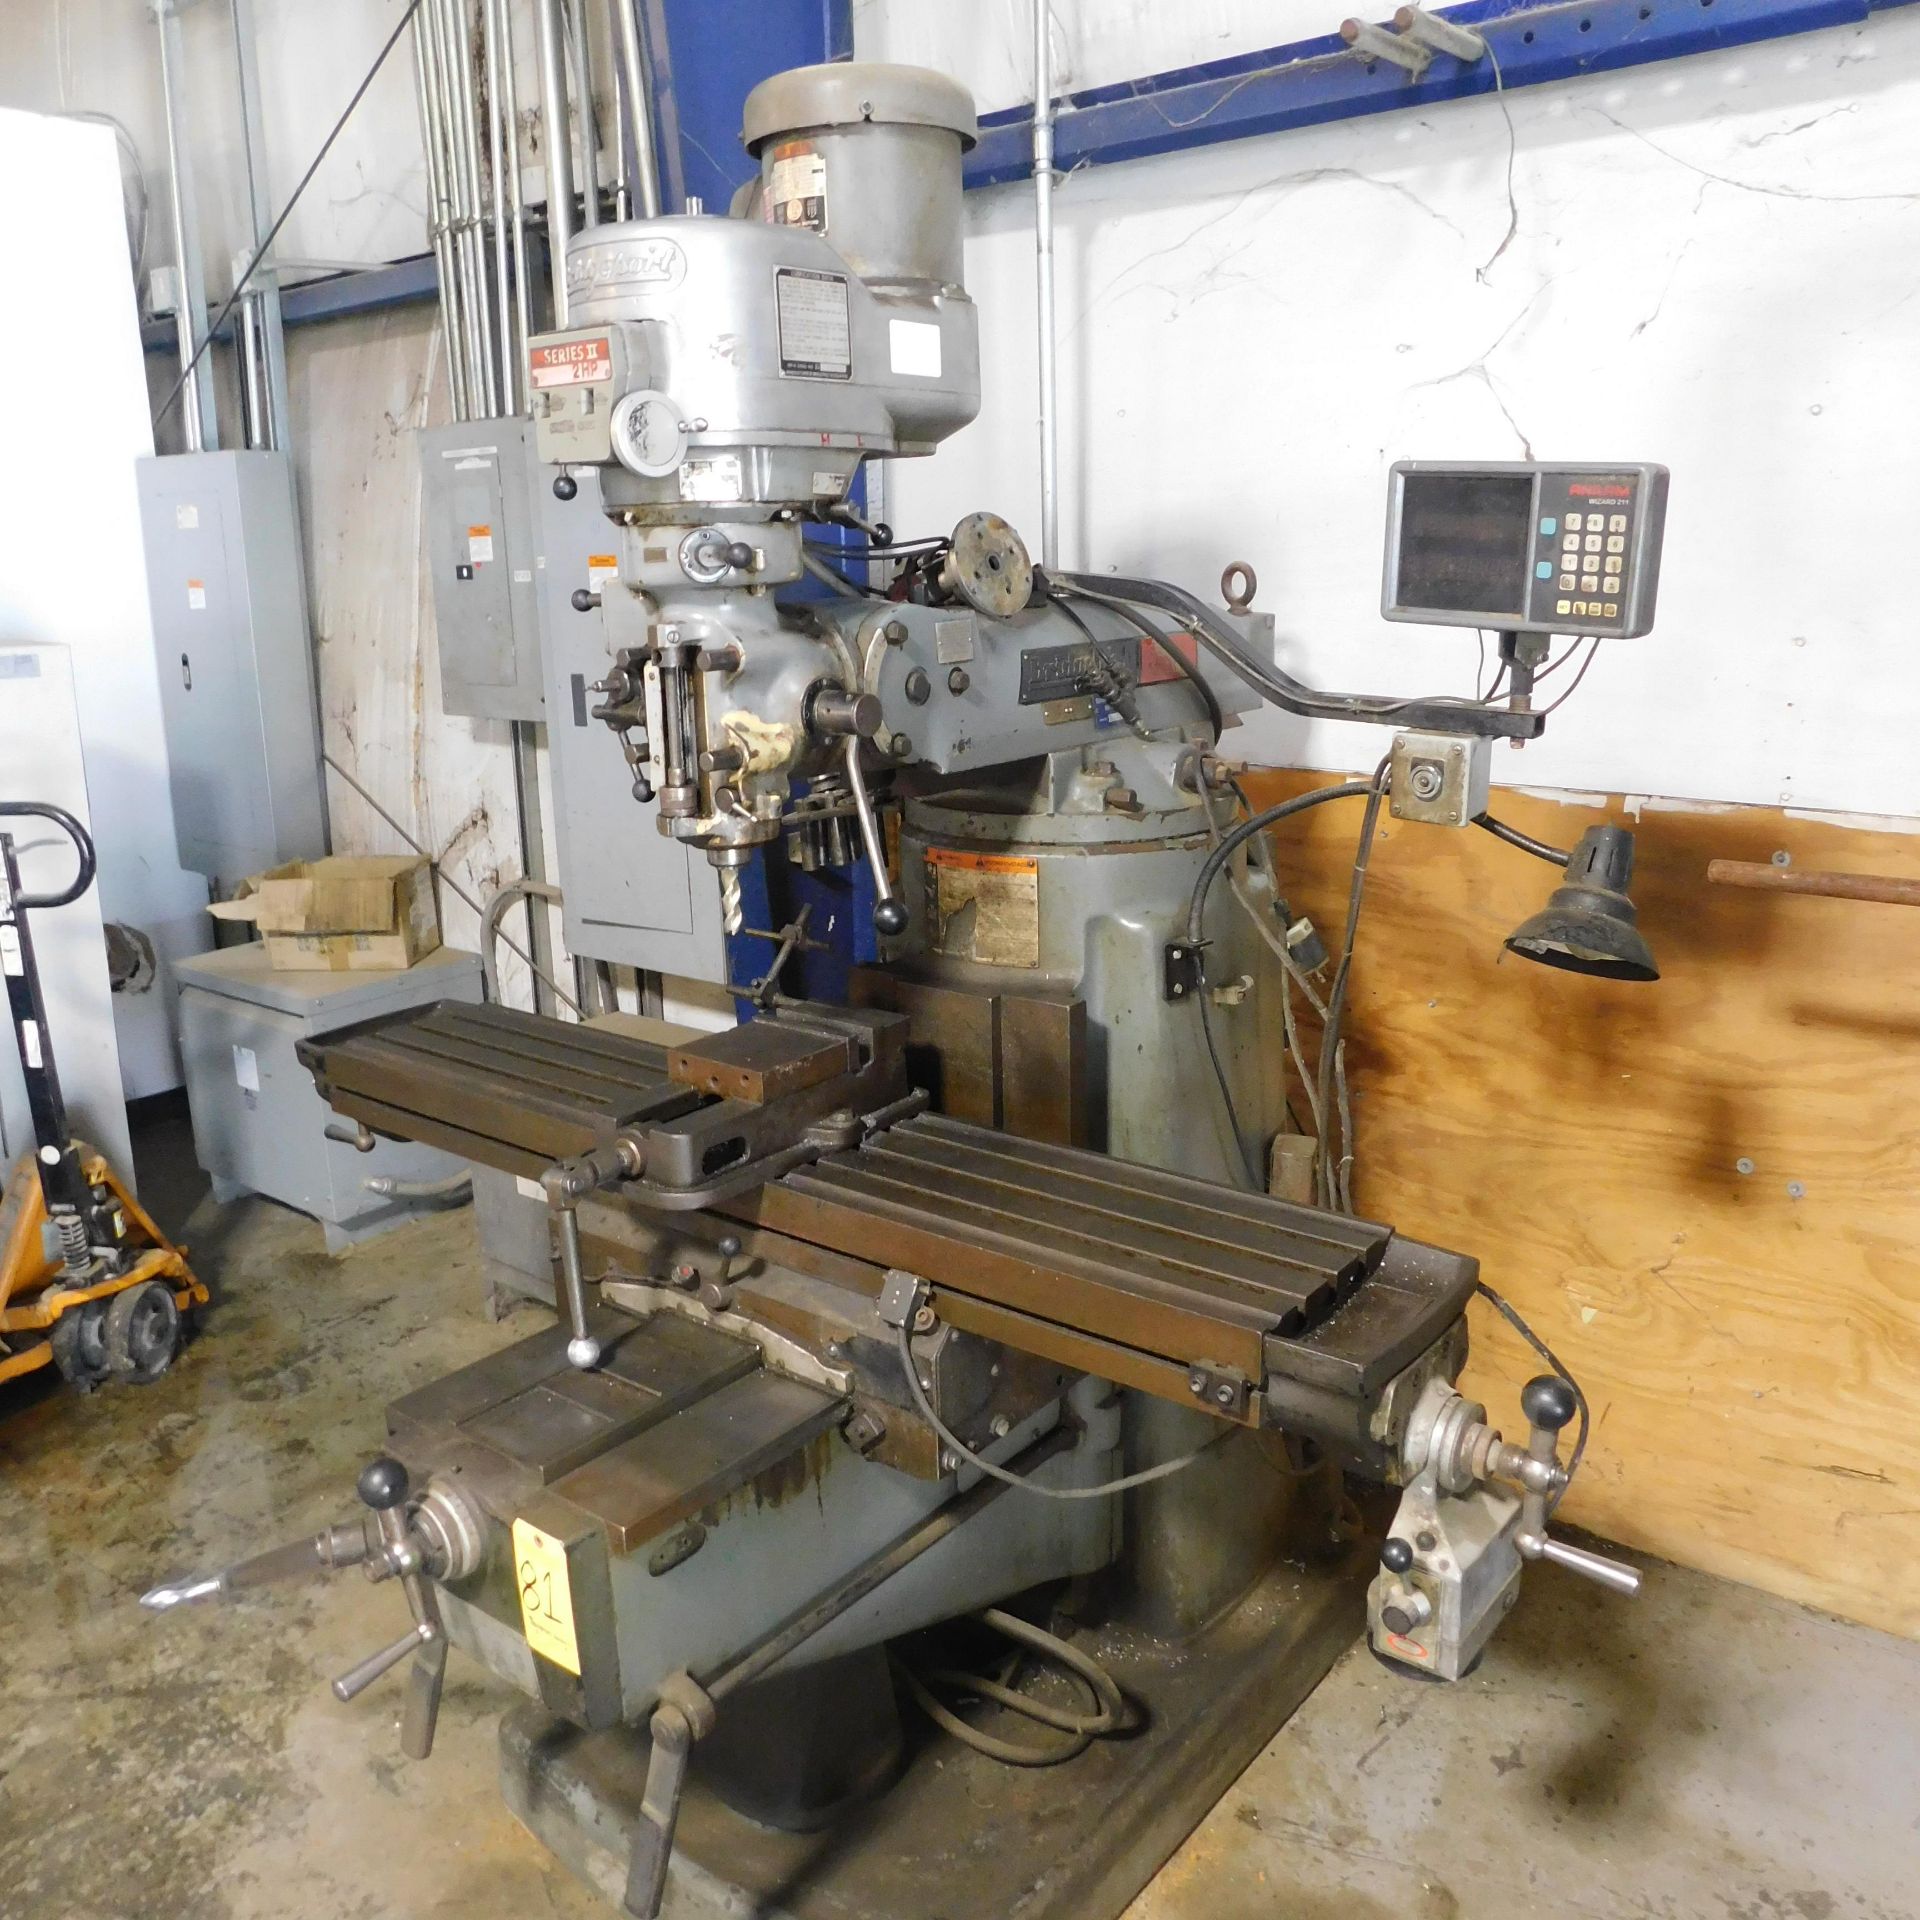 Bridgeport Series II Special Vertical Mill, s/n 6825S, 2 HP, 11" X 58" Table, Anilam D.R.O., Power